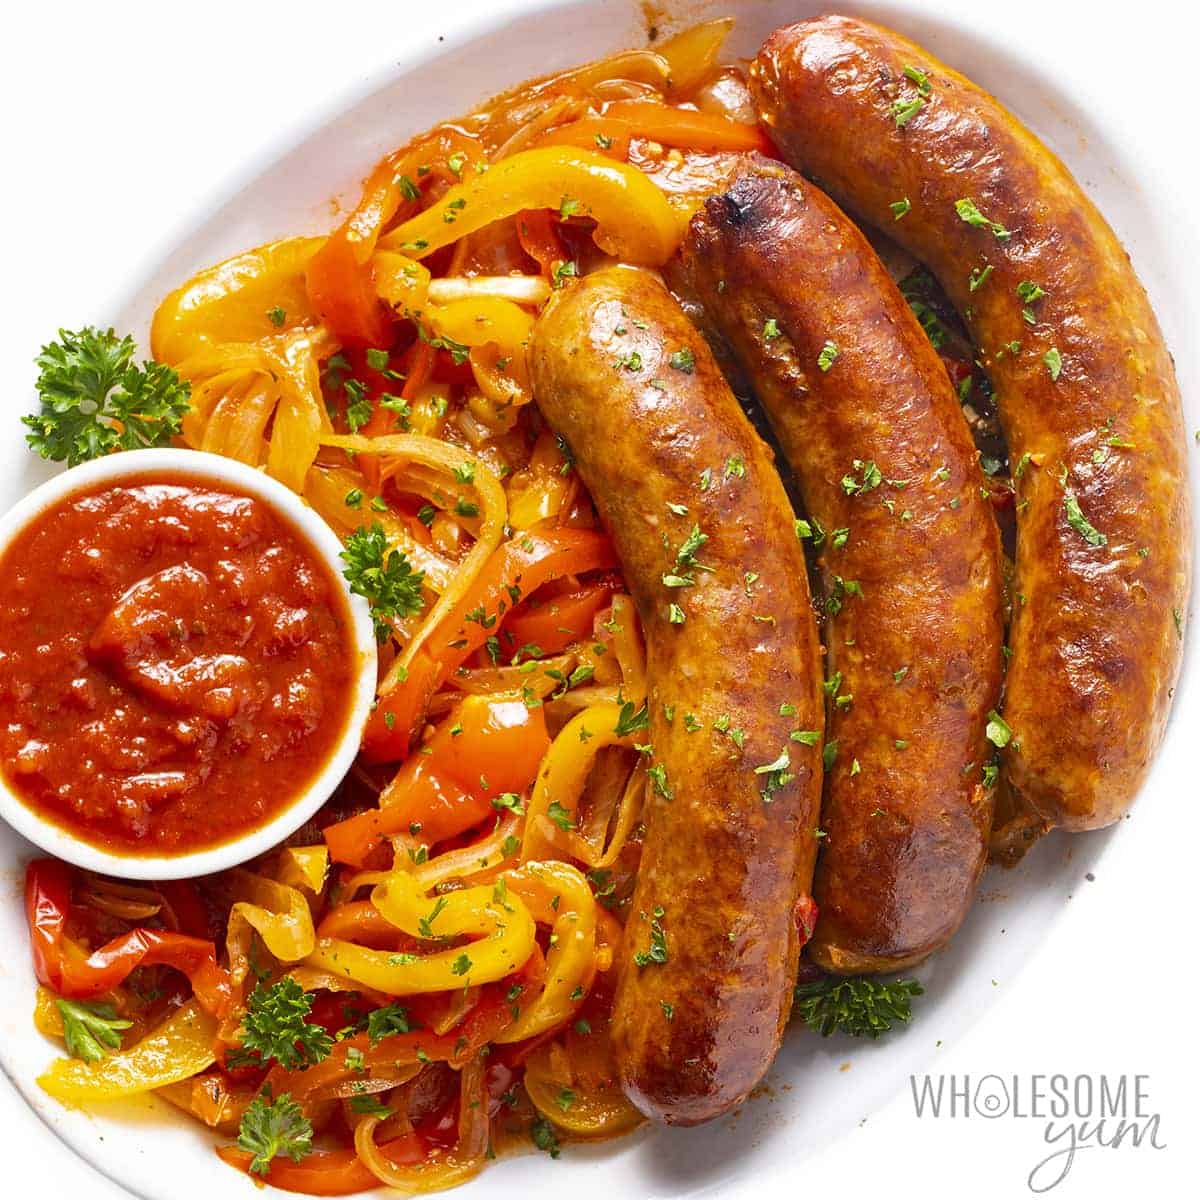 Sausage and peppers recipe on a serving platter.